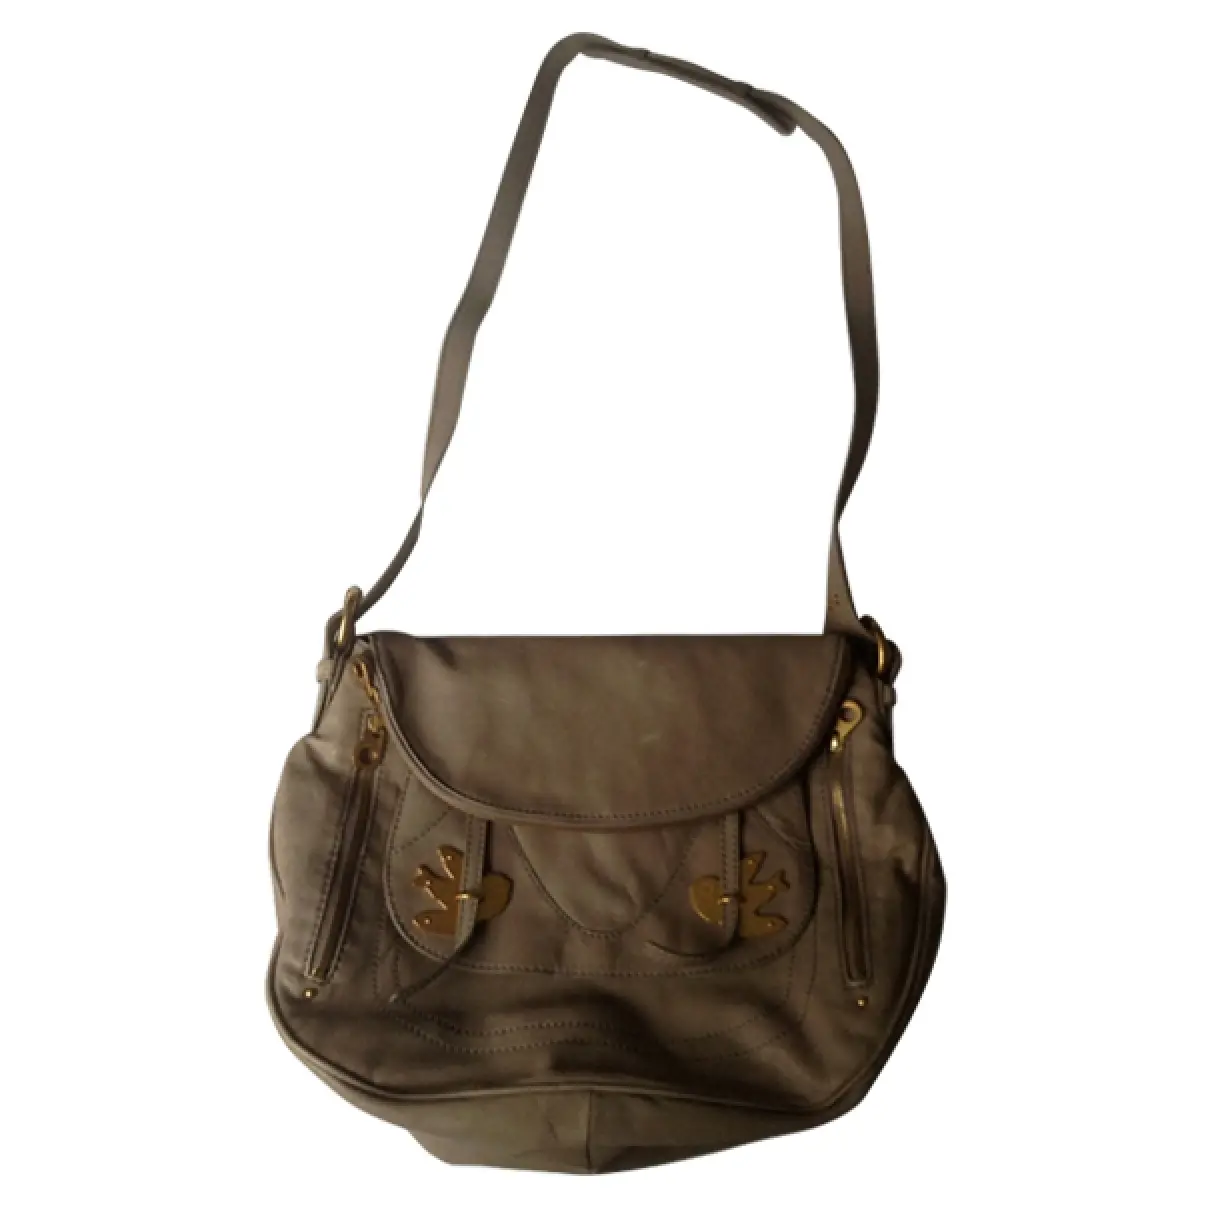 Grey Leather Handbag Marc by Marc Jacobs